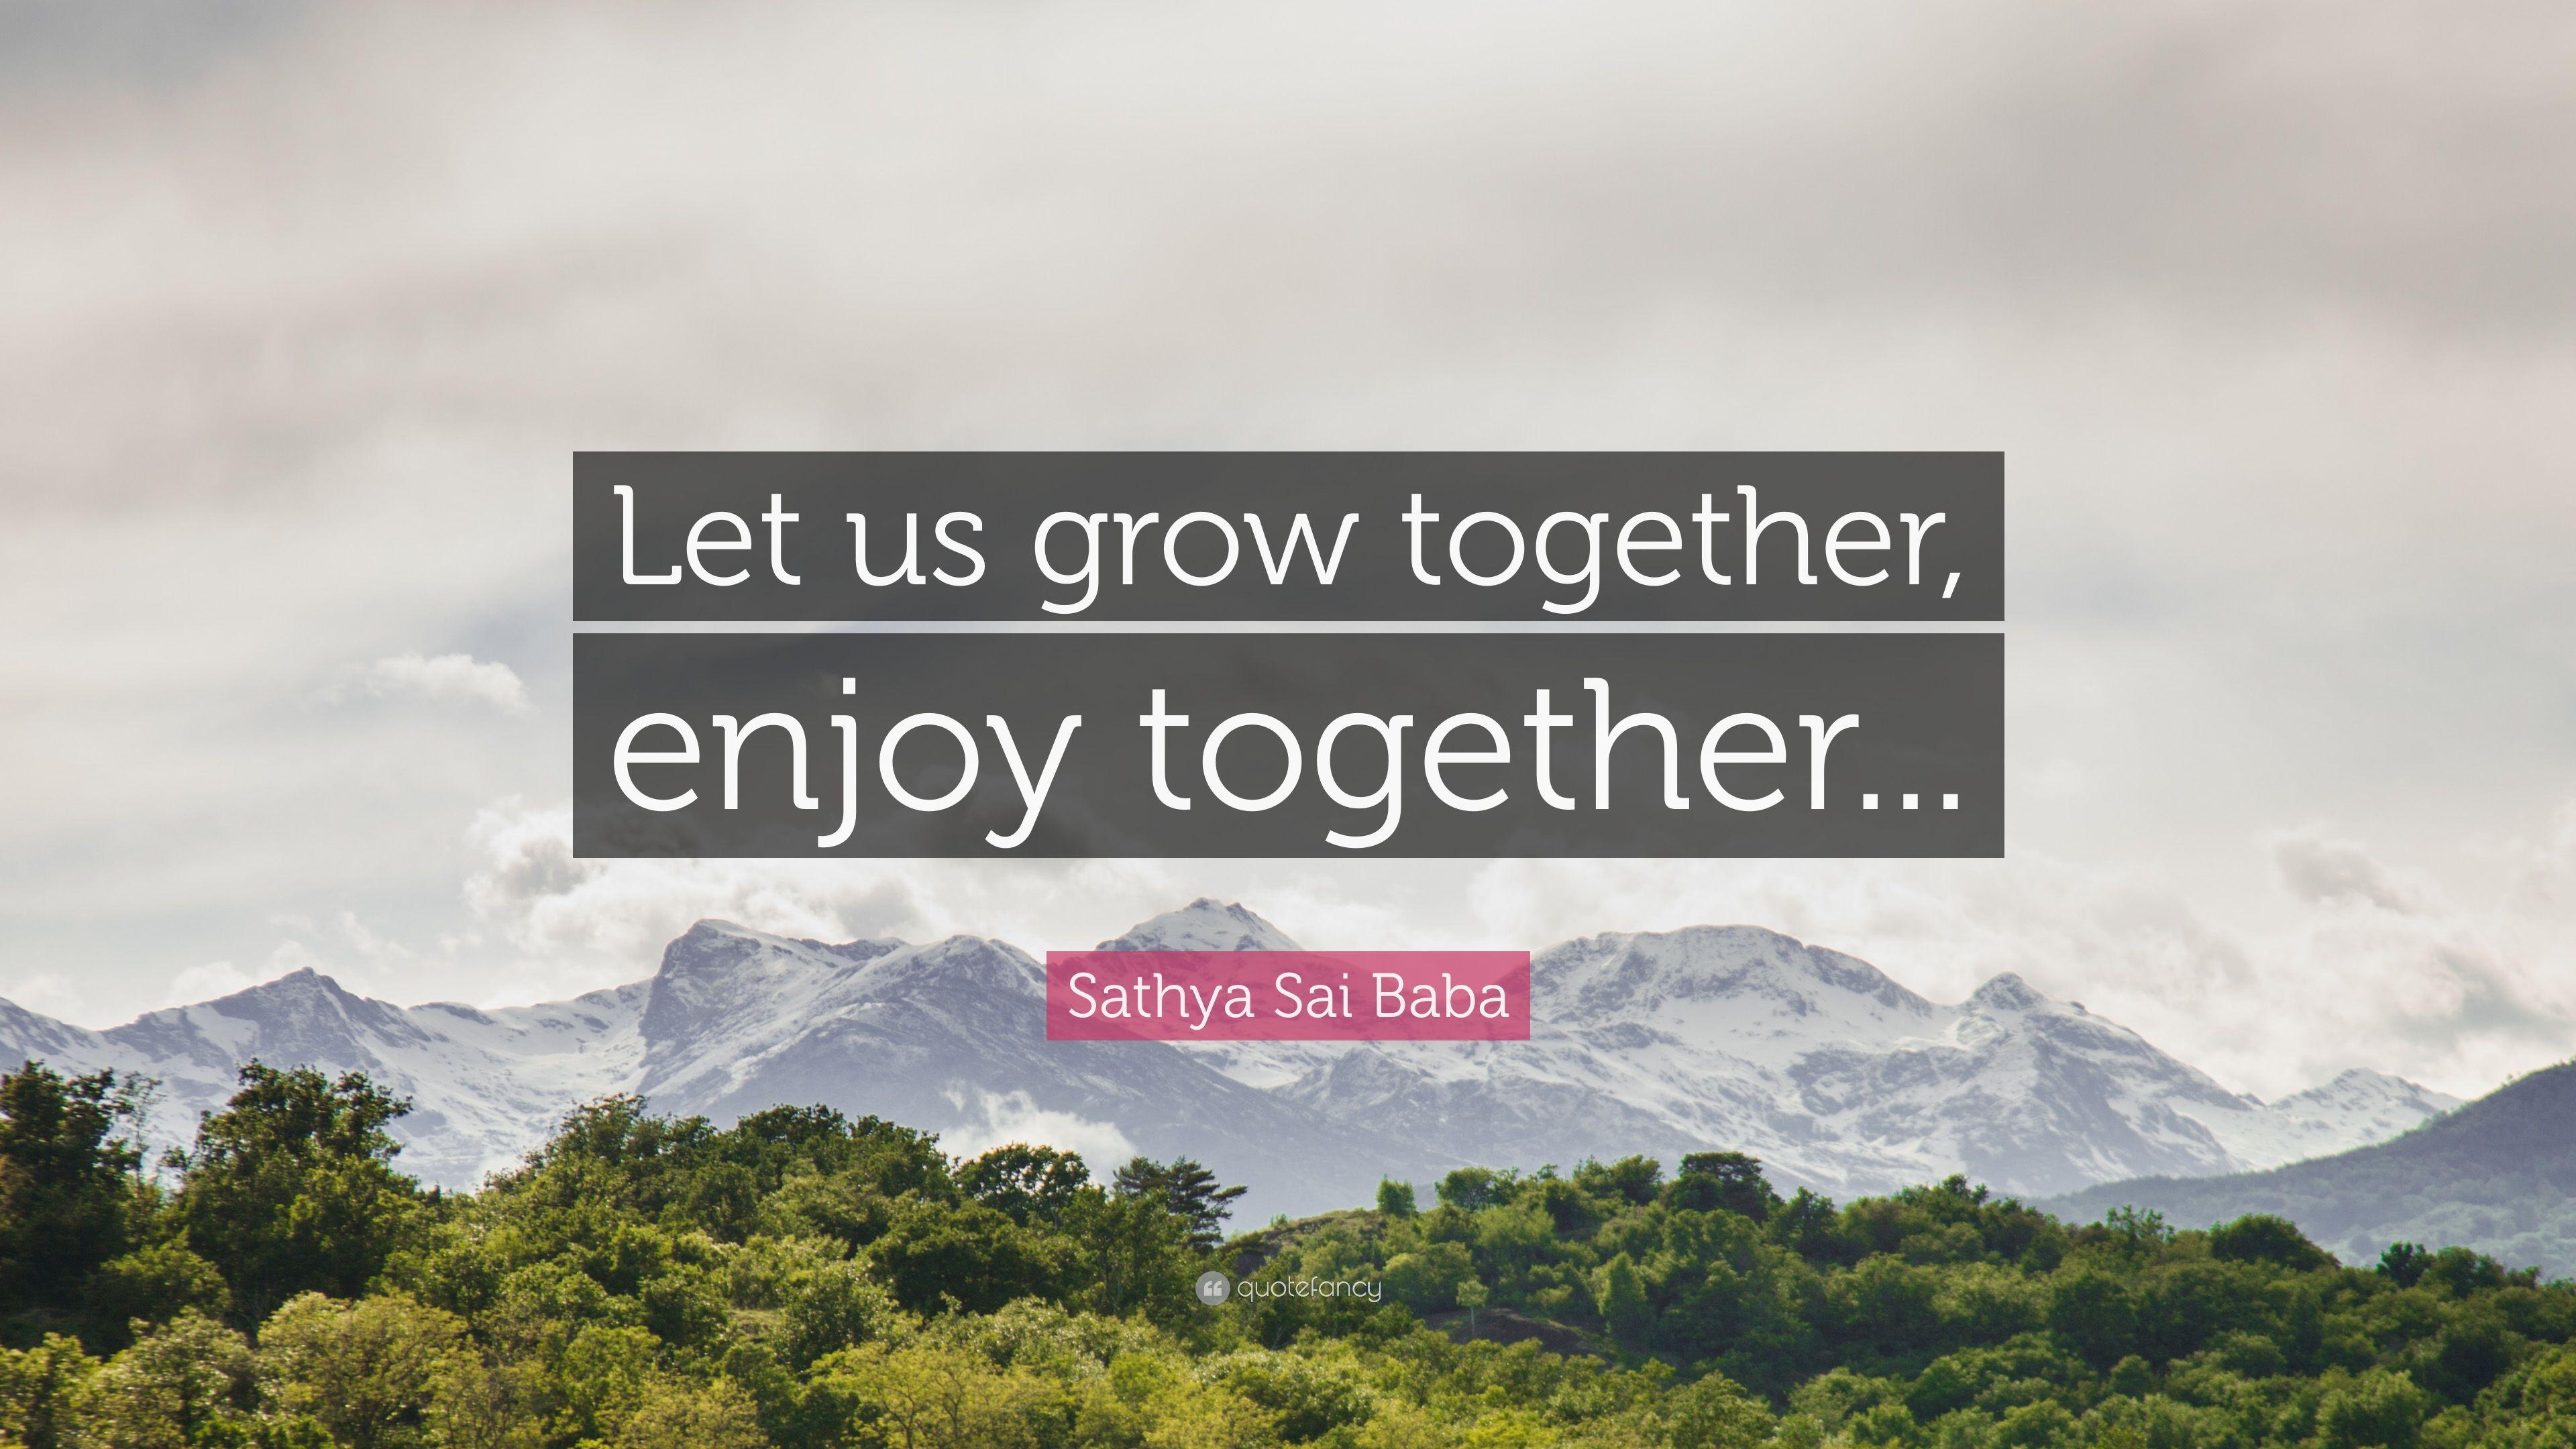 Sathya Sai Baba Quote: “Let us grow together, enjoy together